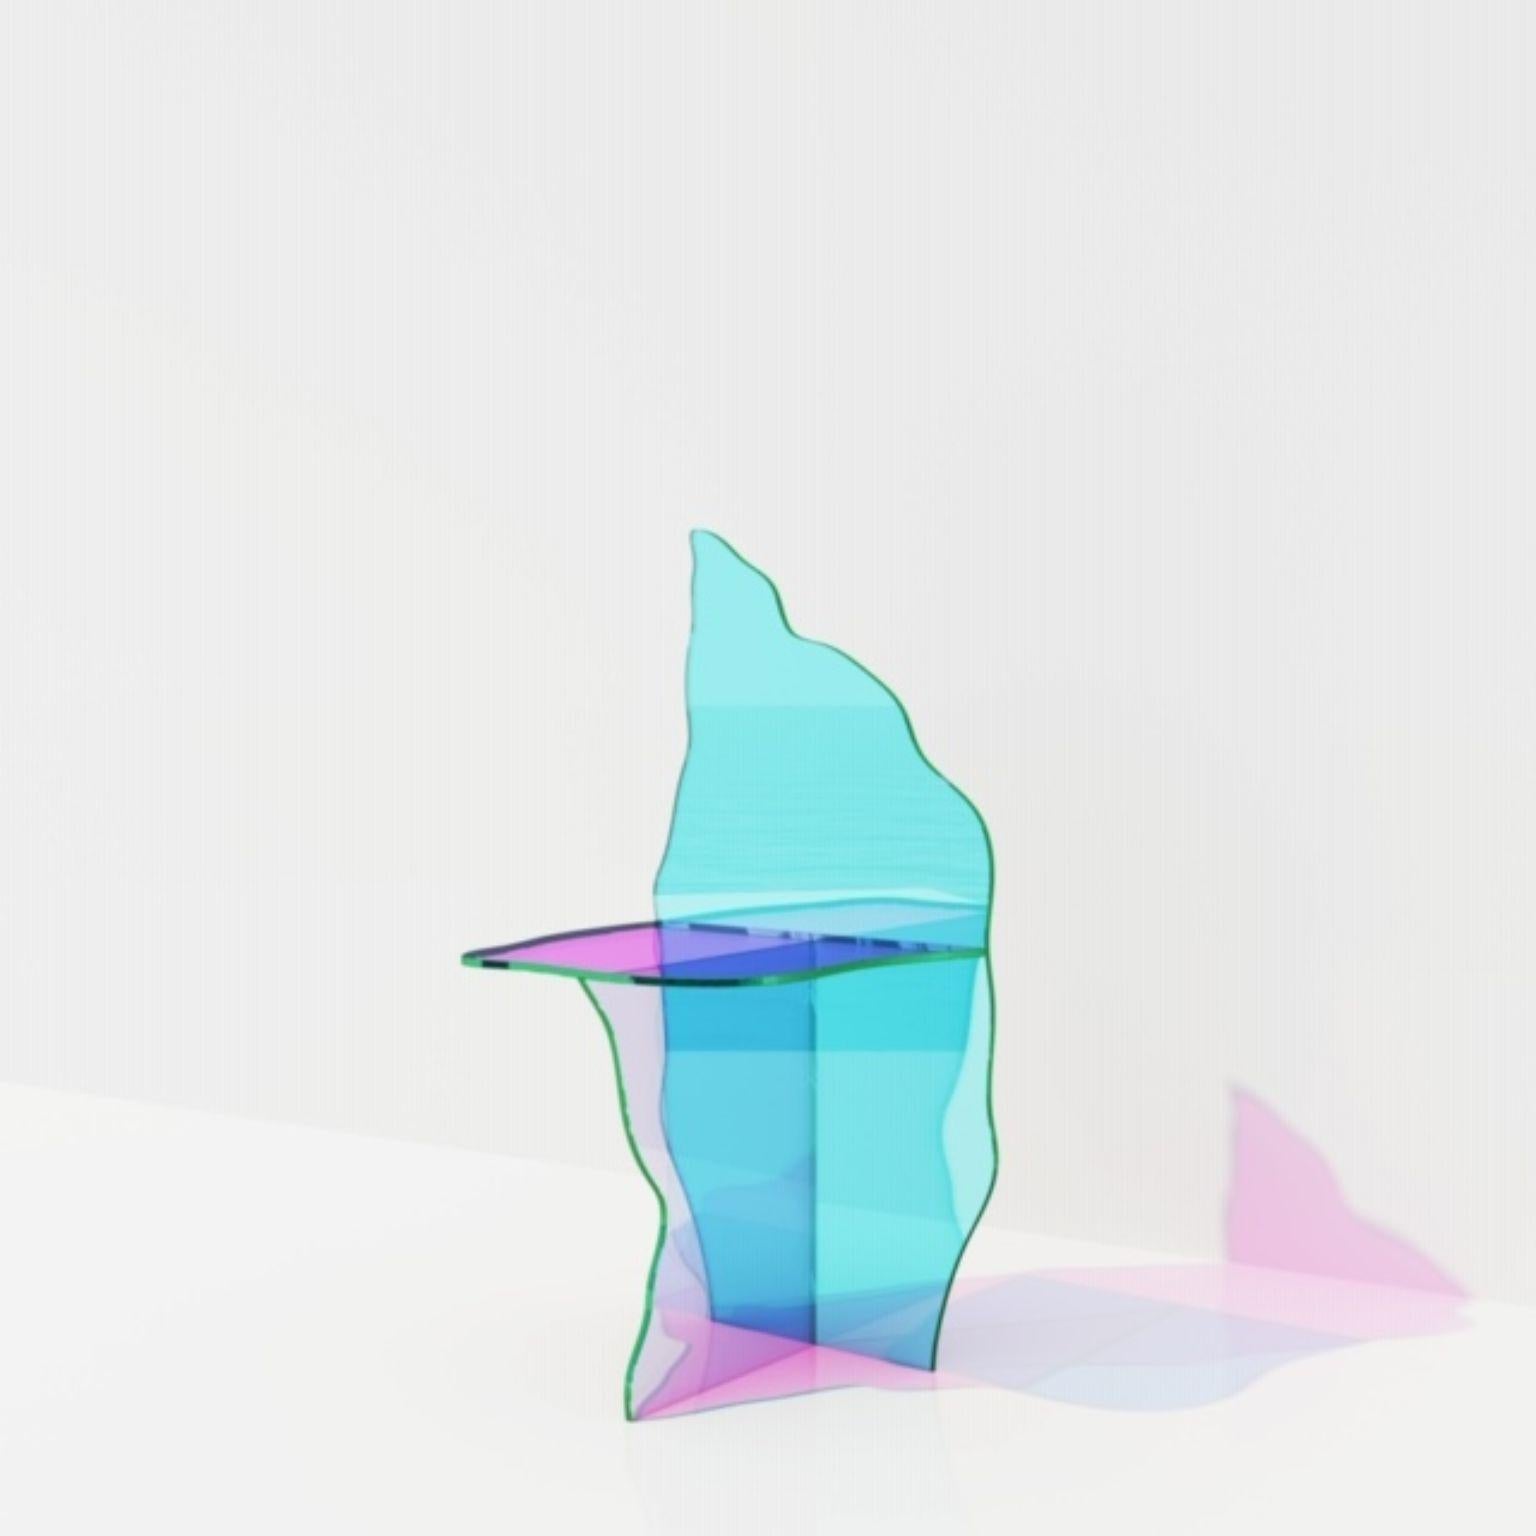 Isola chair by Brajak Vitberg
Dimensions: 43 x 55 x 100 cm
Materials: Dichroic glass

Can be made in Satin glass finish. Please contact us.

Bijelic and Brajak are two architects from Ljubljana, Slovenia.
They are striving to design craft elements